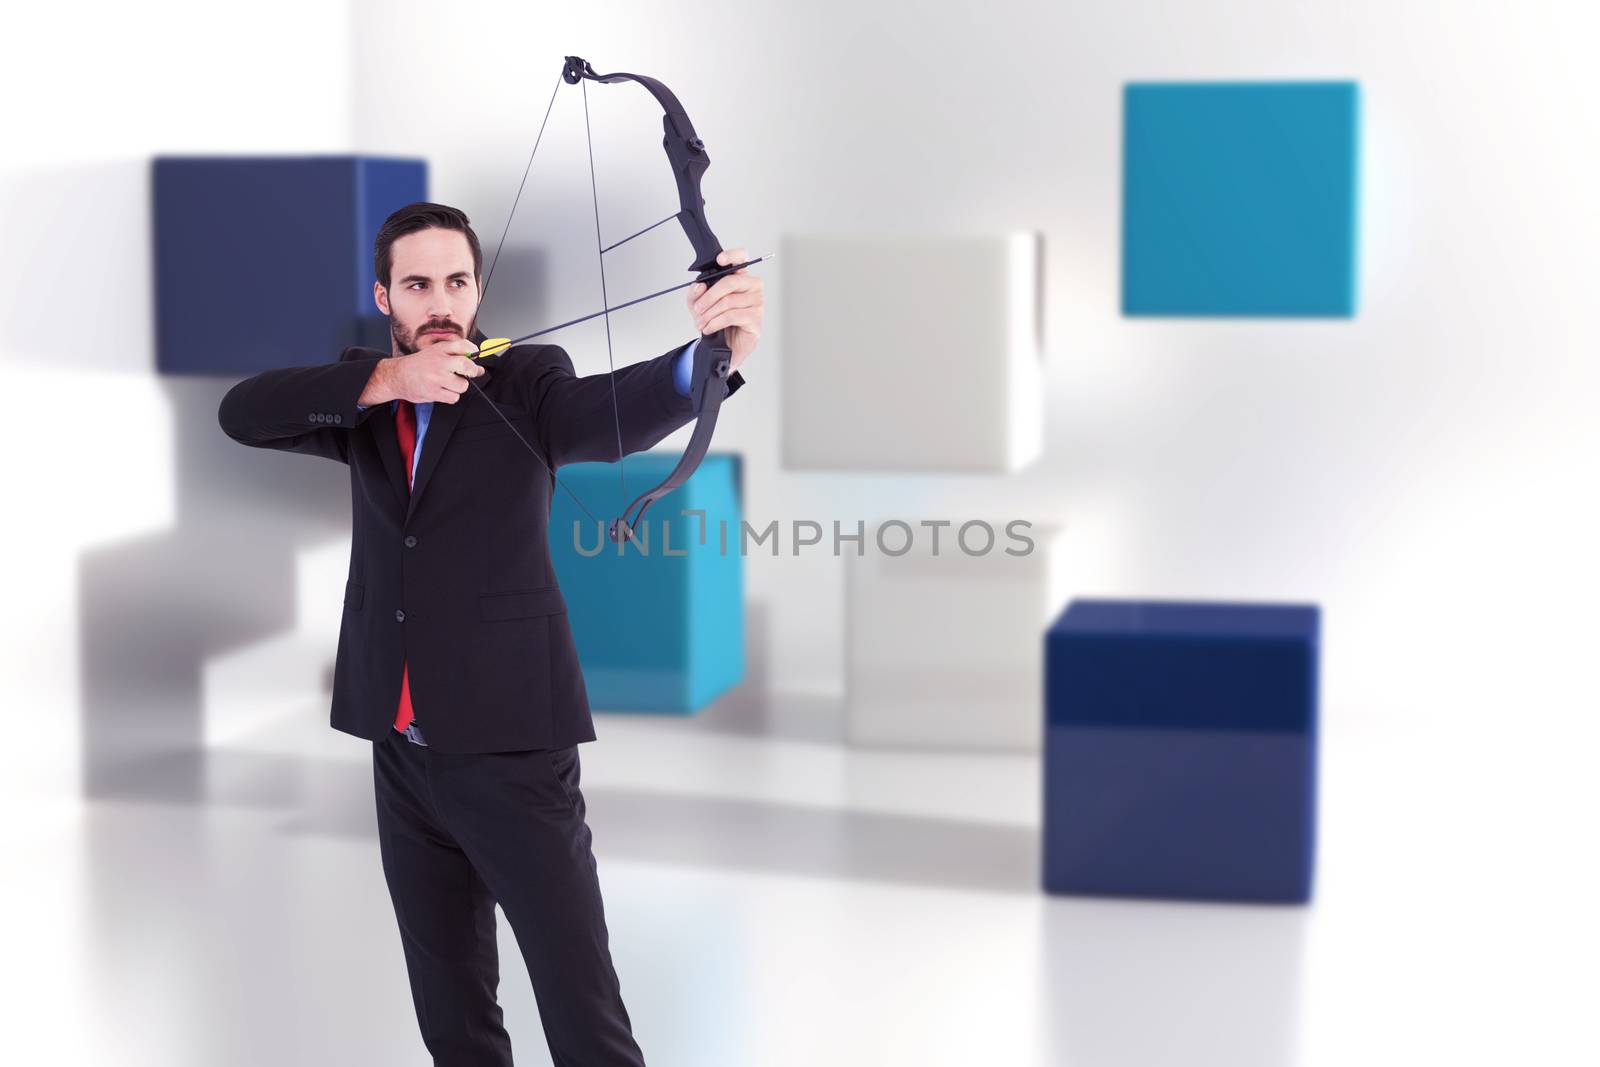 Focused businessman shooting a bow and arrow against abstract background